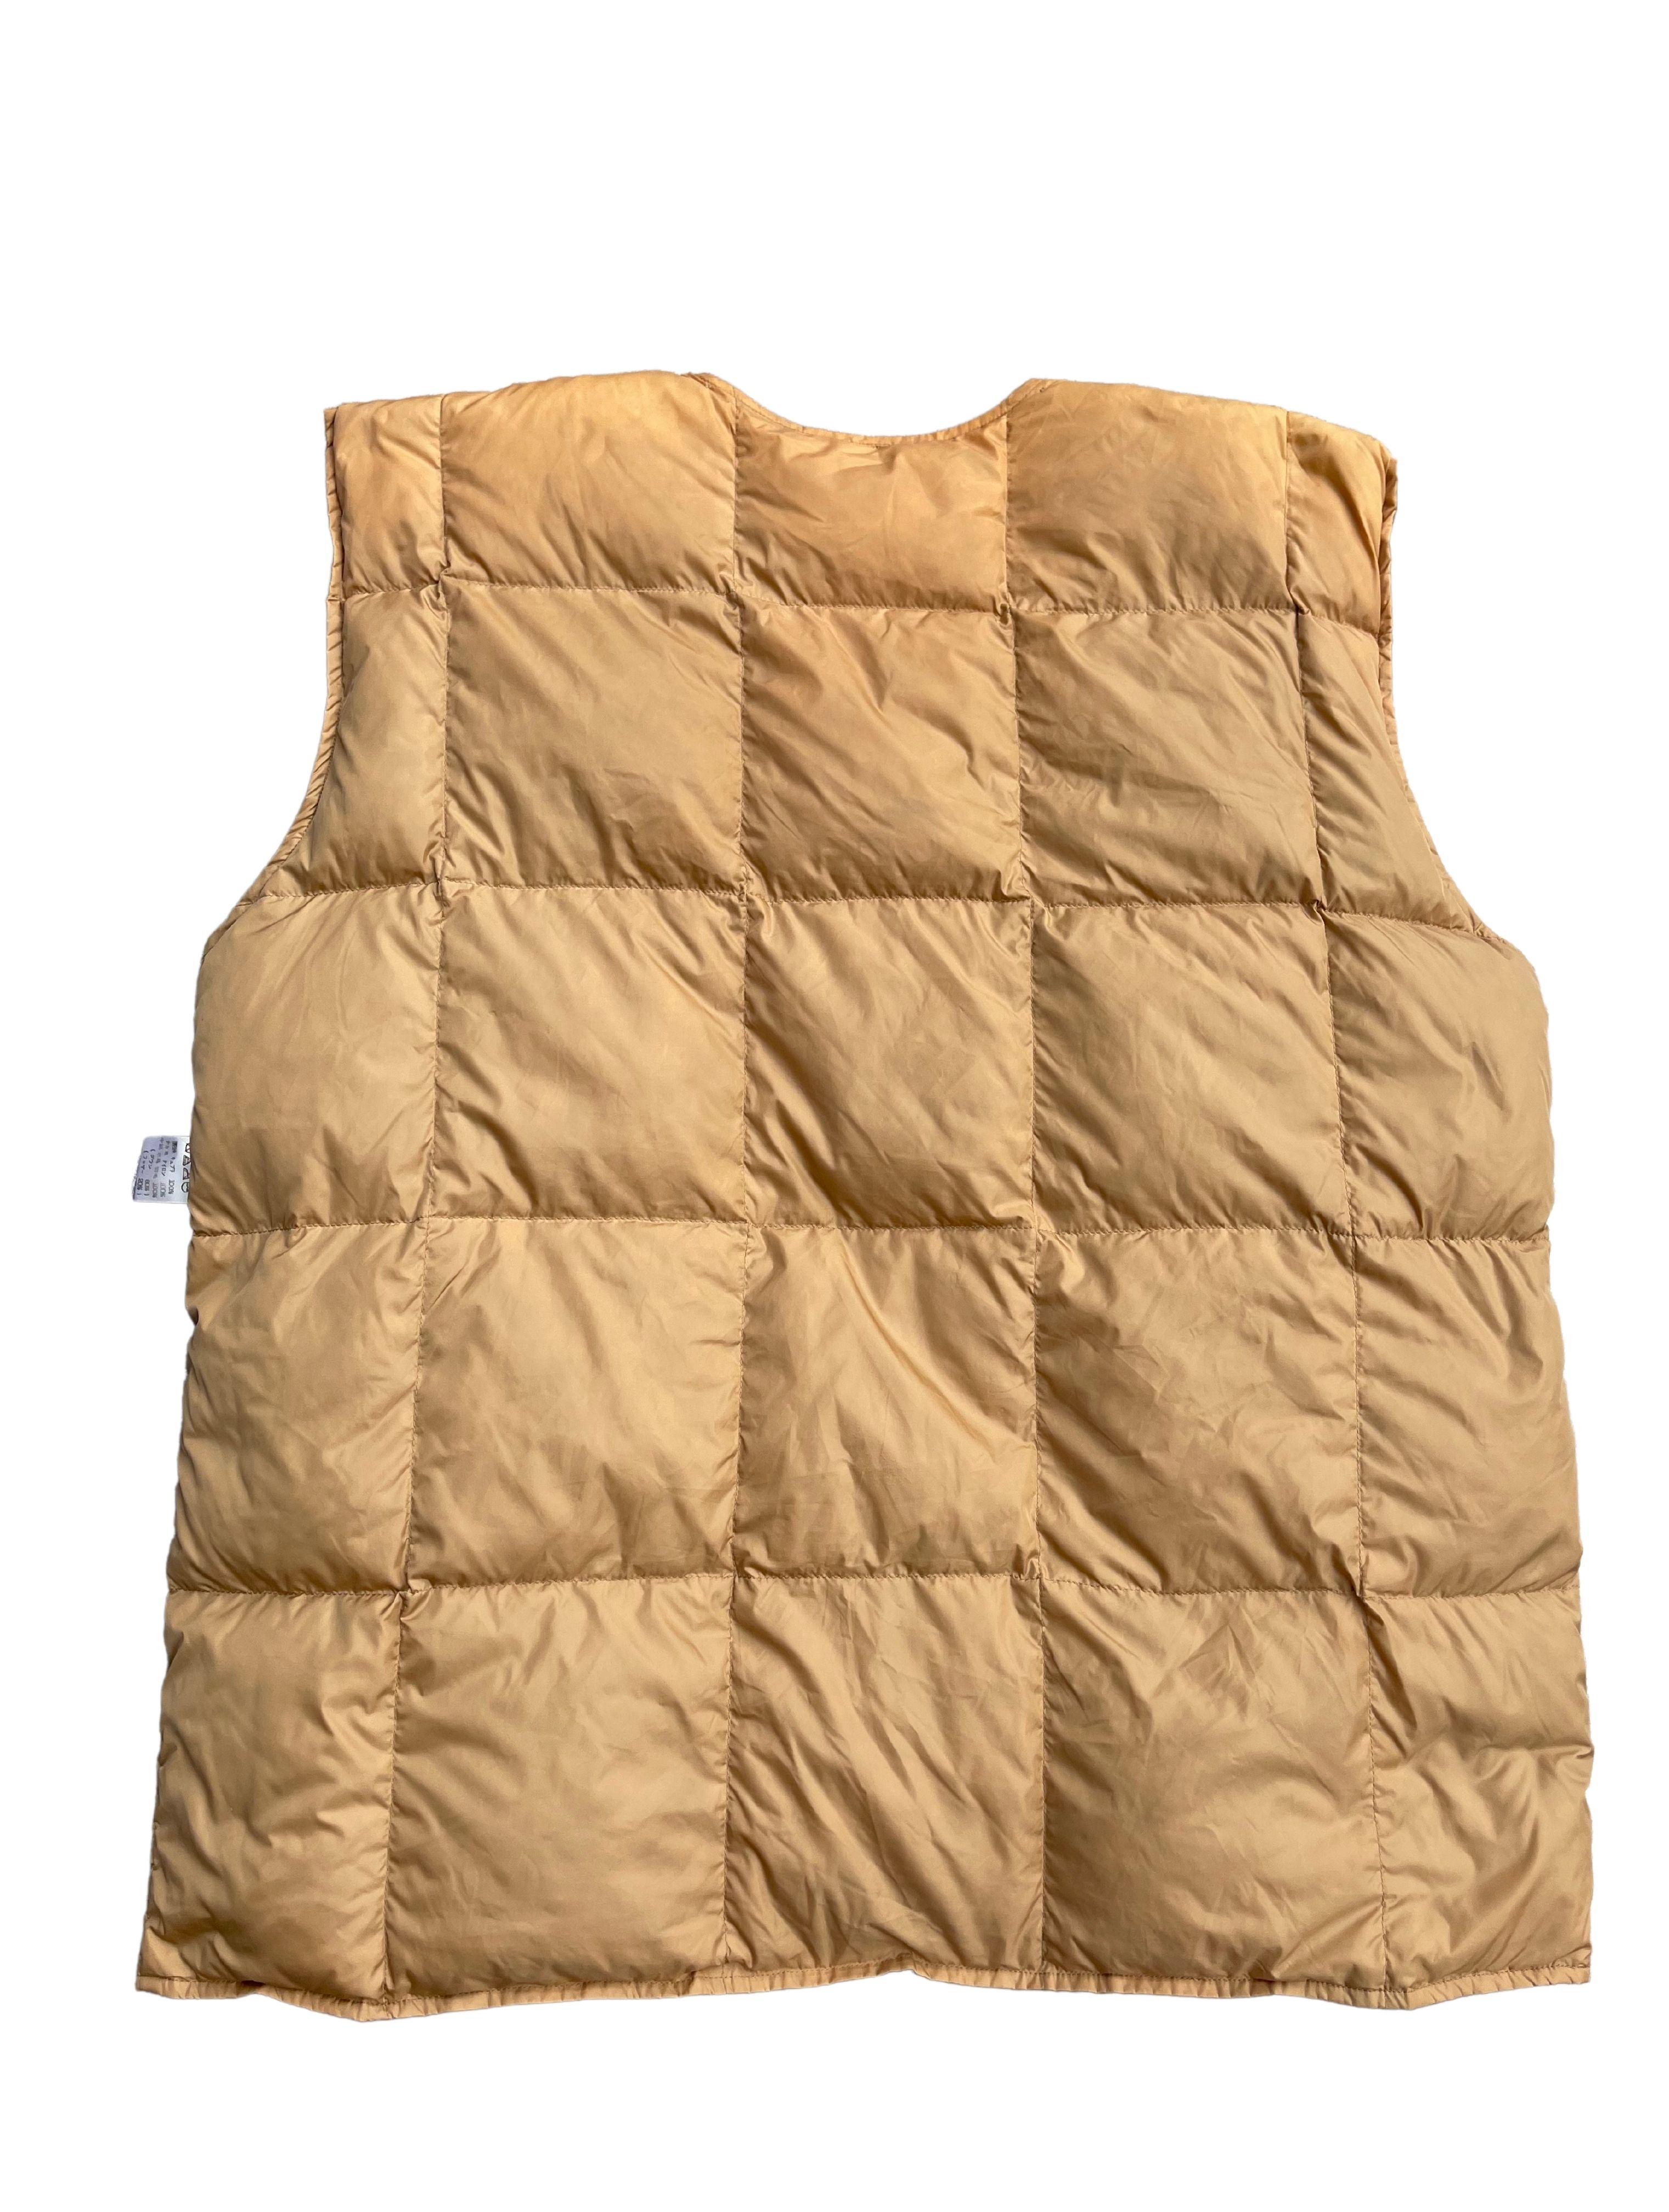 Vintage piece from Issey Miyake, very similar to recent Visvim/majority Japanese brand.

The material is nylon, and the pillow puffer has remain in shape for more than 30 years.

Size: OS

Condition: 9/10. No Significant signs of usage, minor